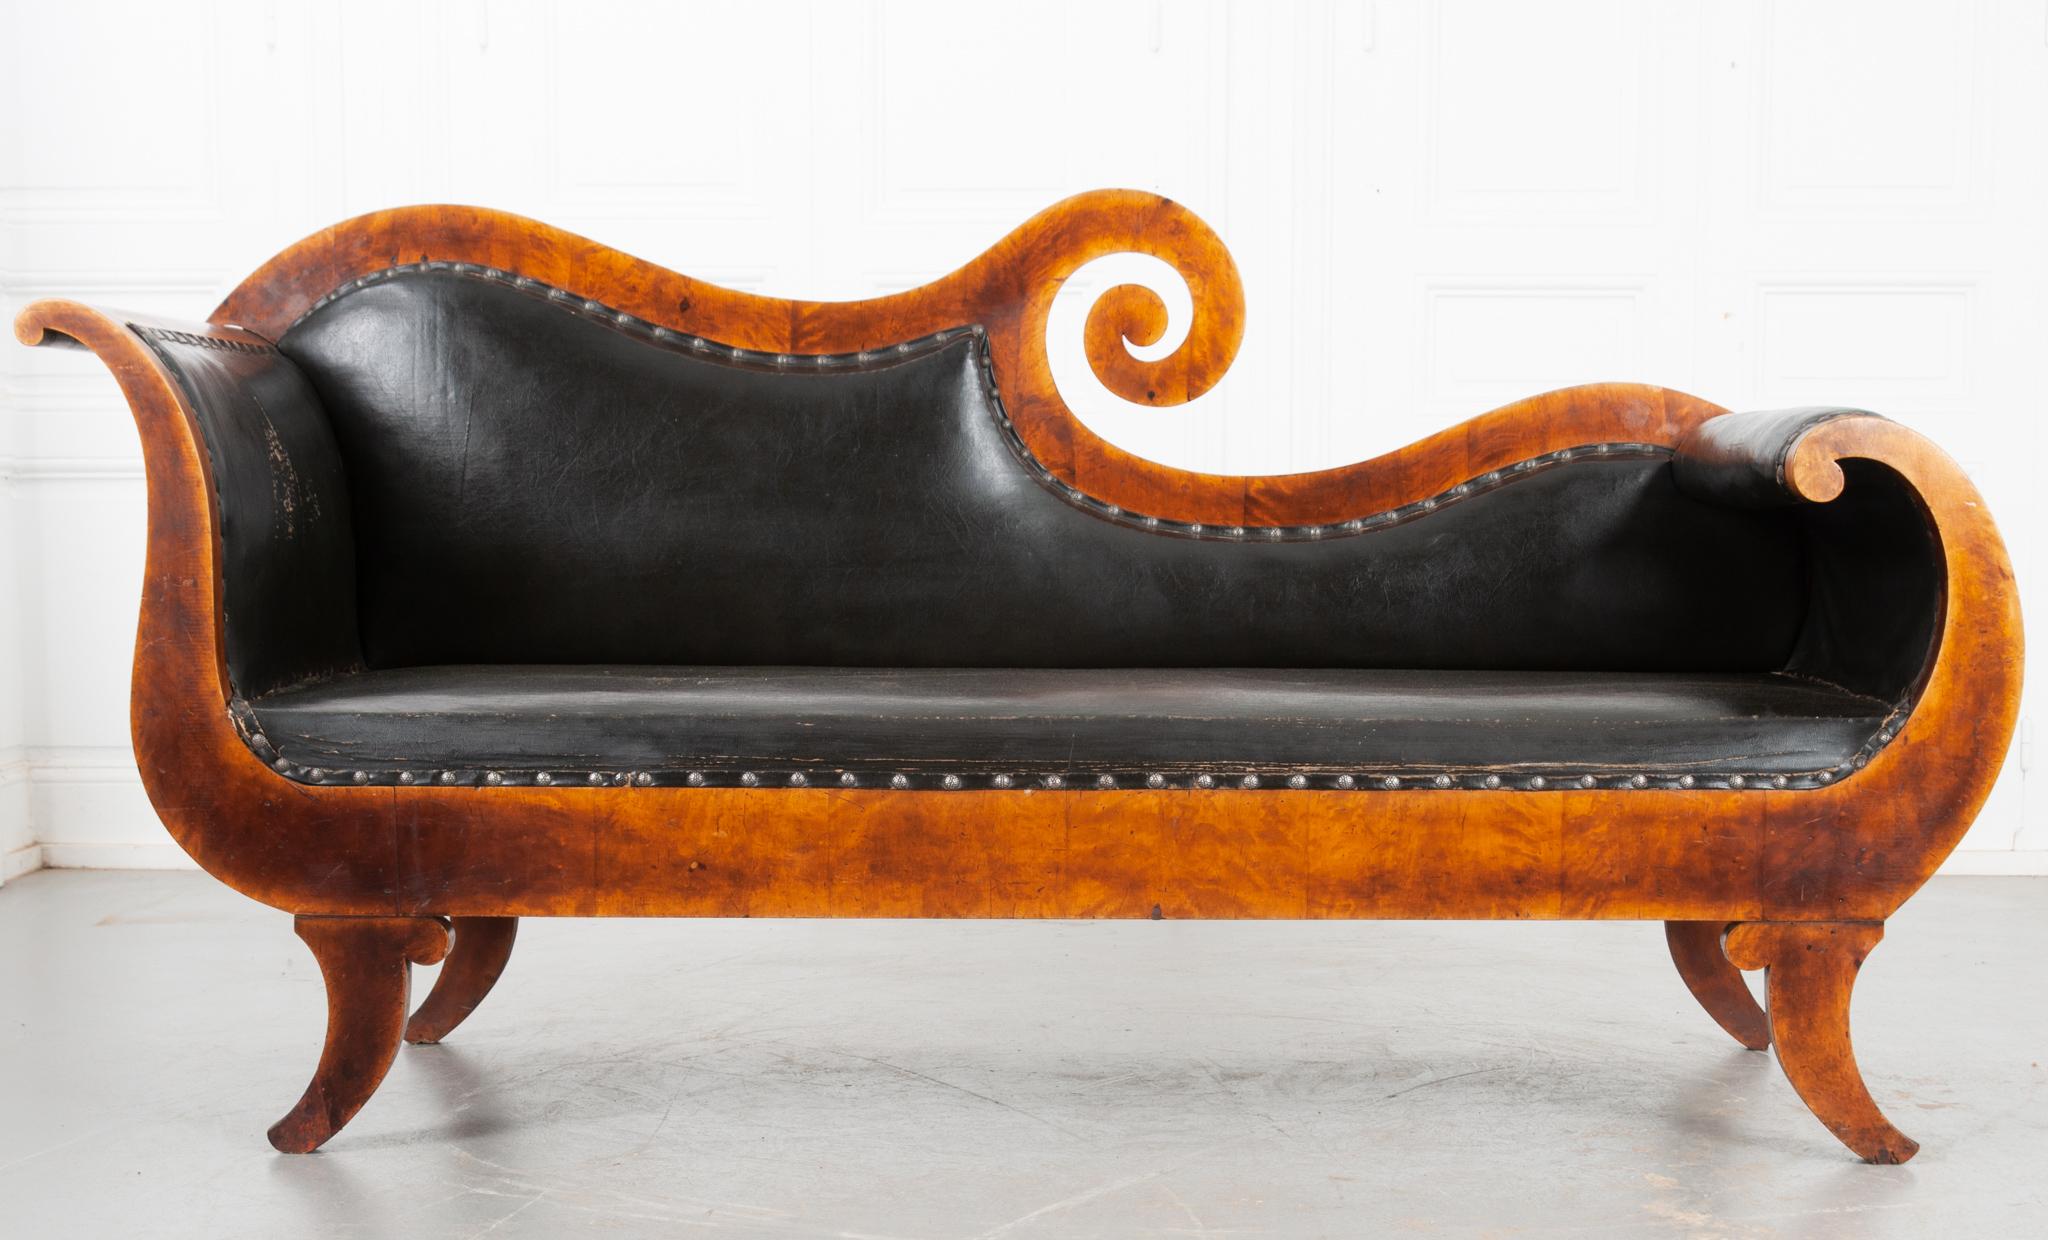 This curvilinear settee is from Sweden circa 1830 and made of striking birchwood. The worn leather has a patina and has been made soft and supple over the last few centuries. Decorative honeycomb nailheads secure the leather upholstery in place. The